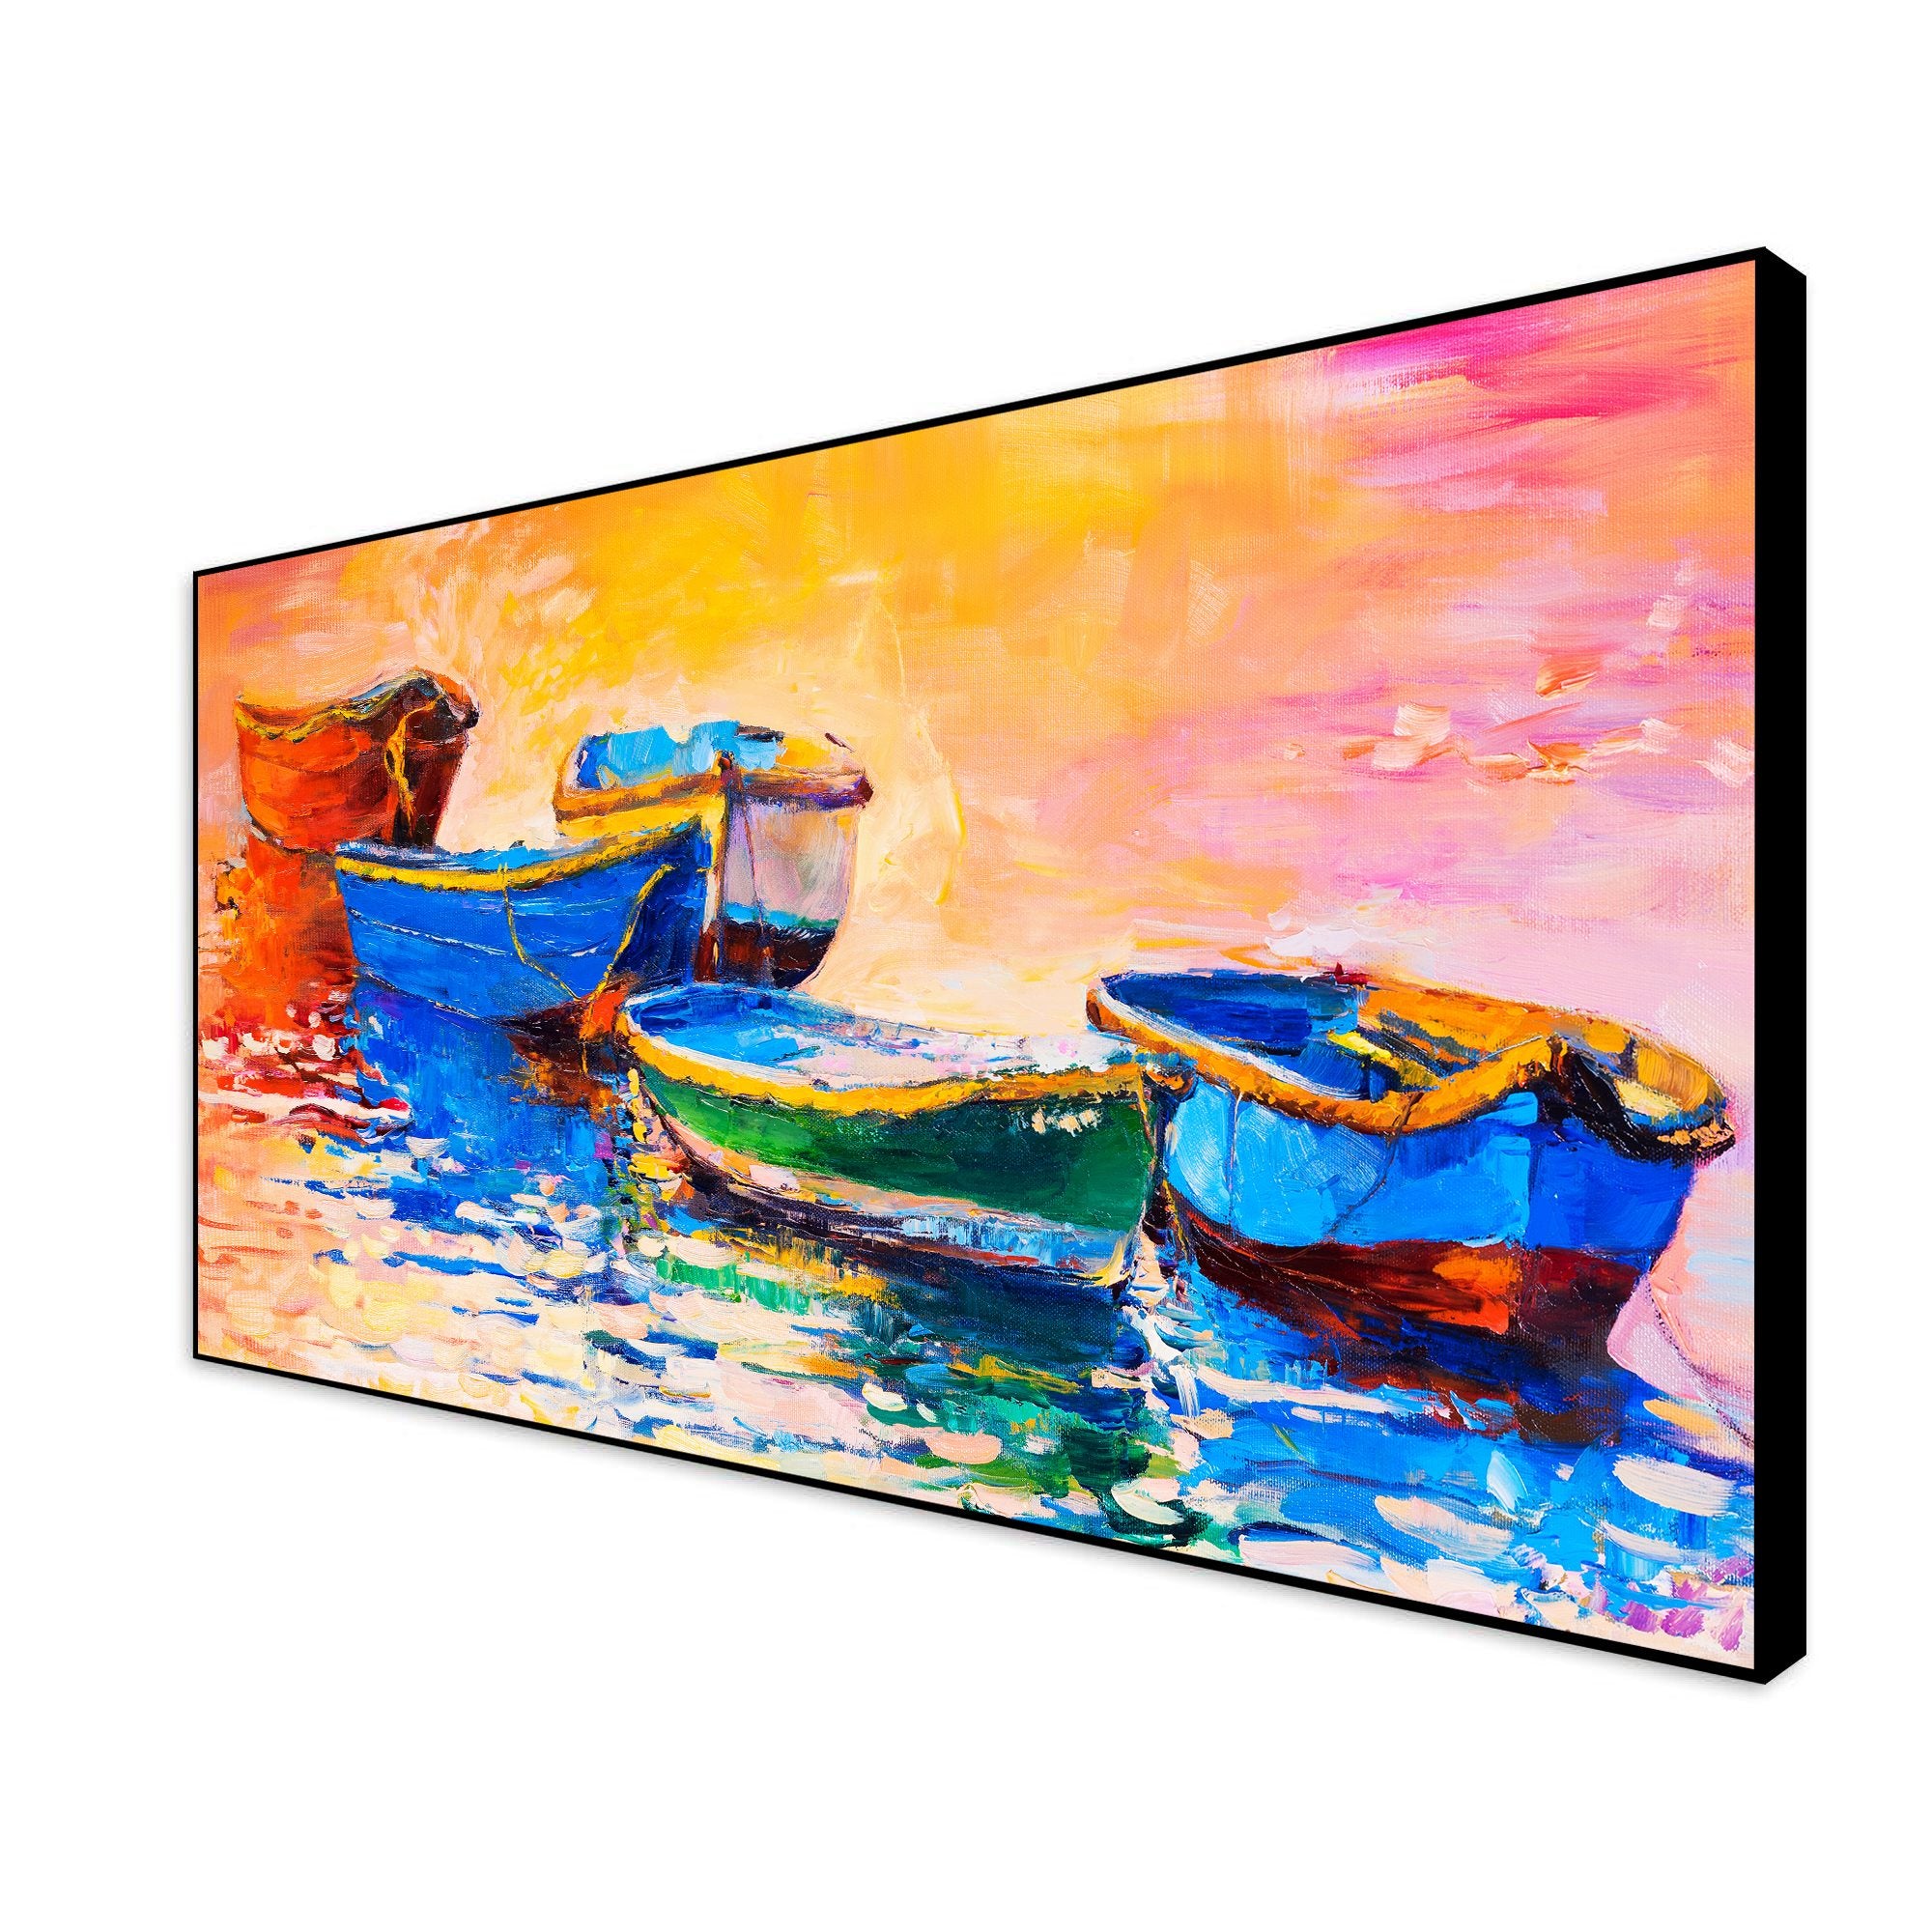 Boat Colorful Floating Frame Wall Painting